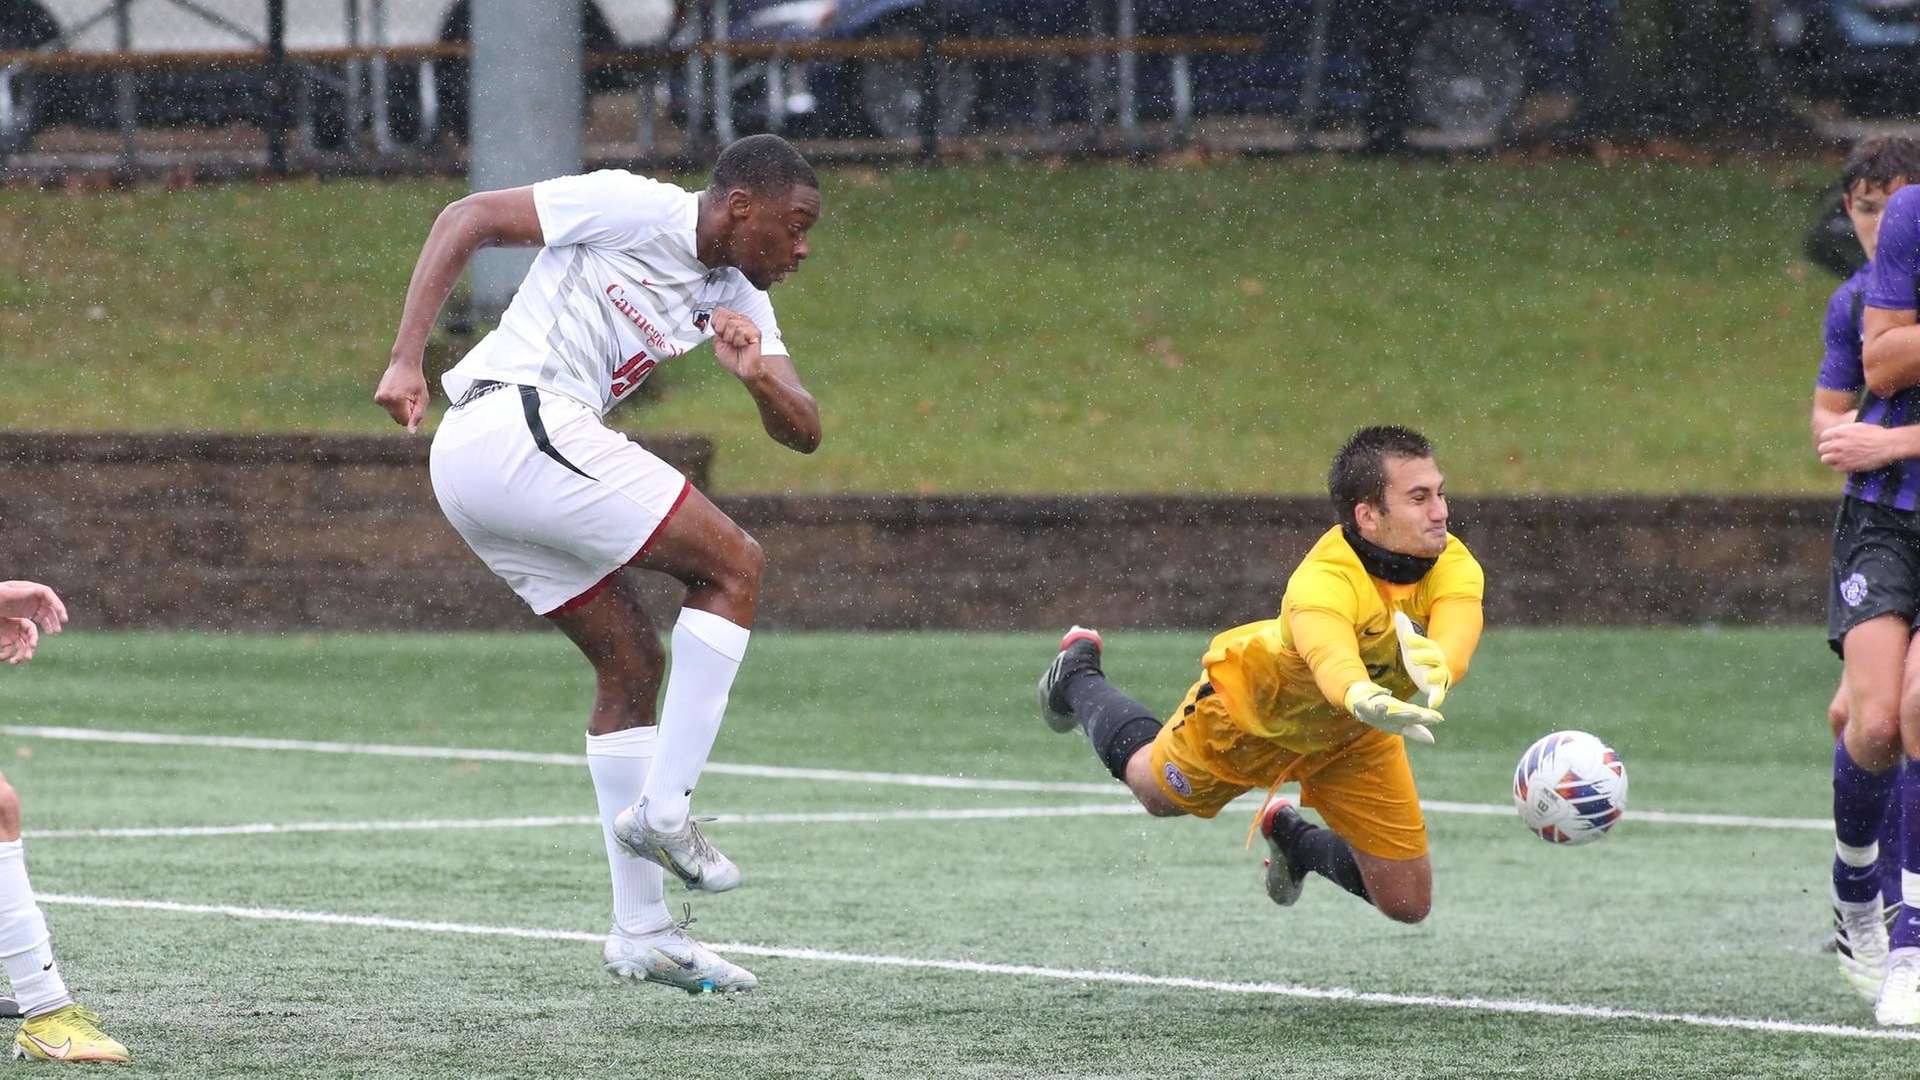 men's soccer player wearing white uniform looks as the keeper wearing yellow dives to stop his shot which hits a defender